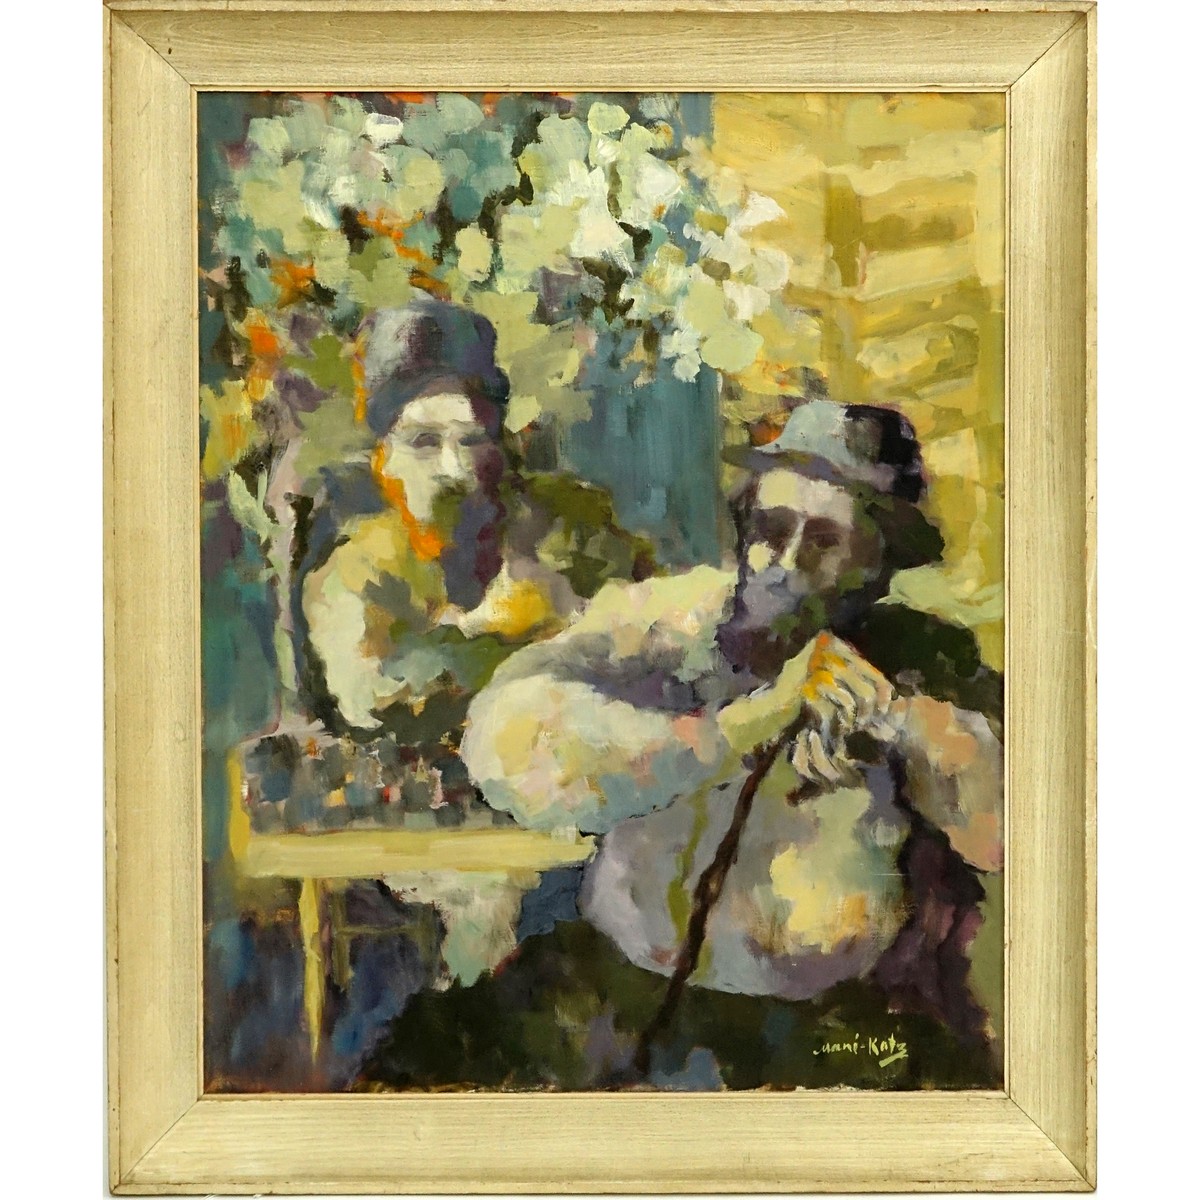 Mané-Katz, French/Ukranian (1894–1962) Oil on Canvas. Signed lower right.